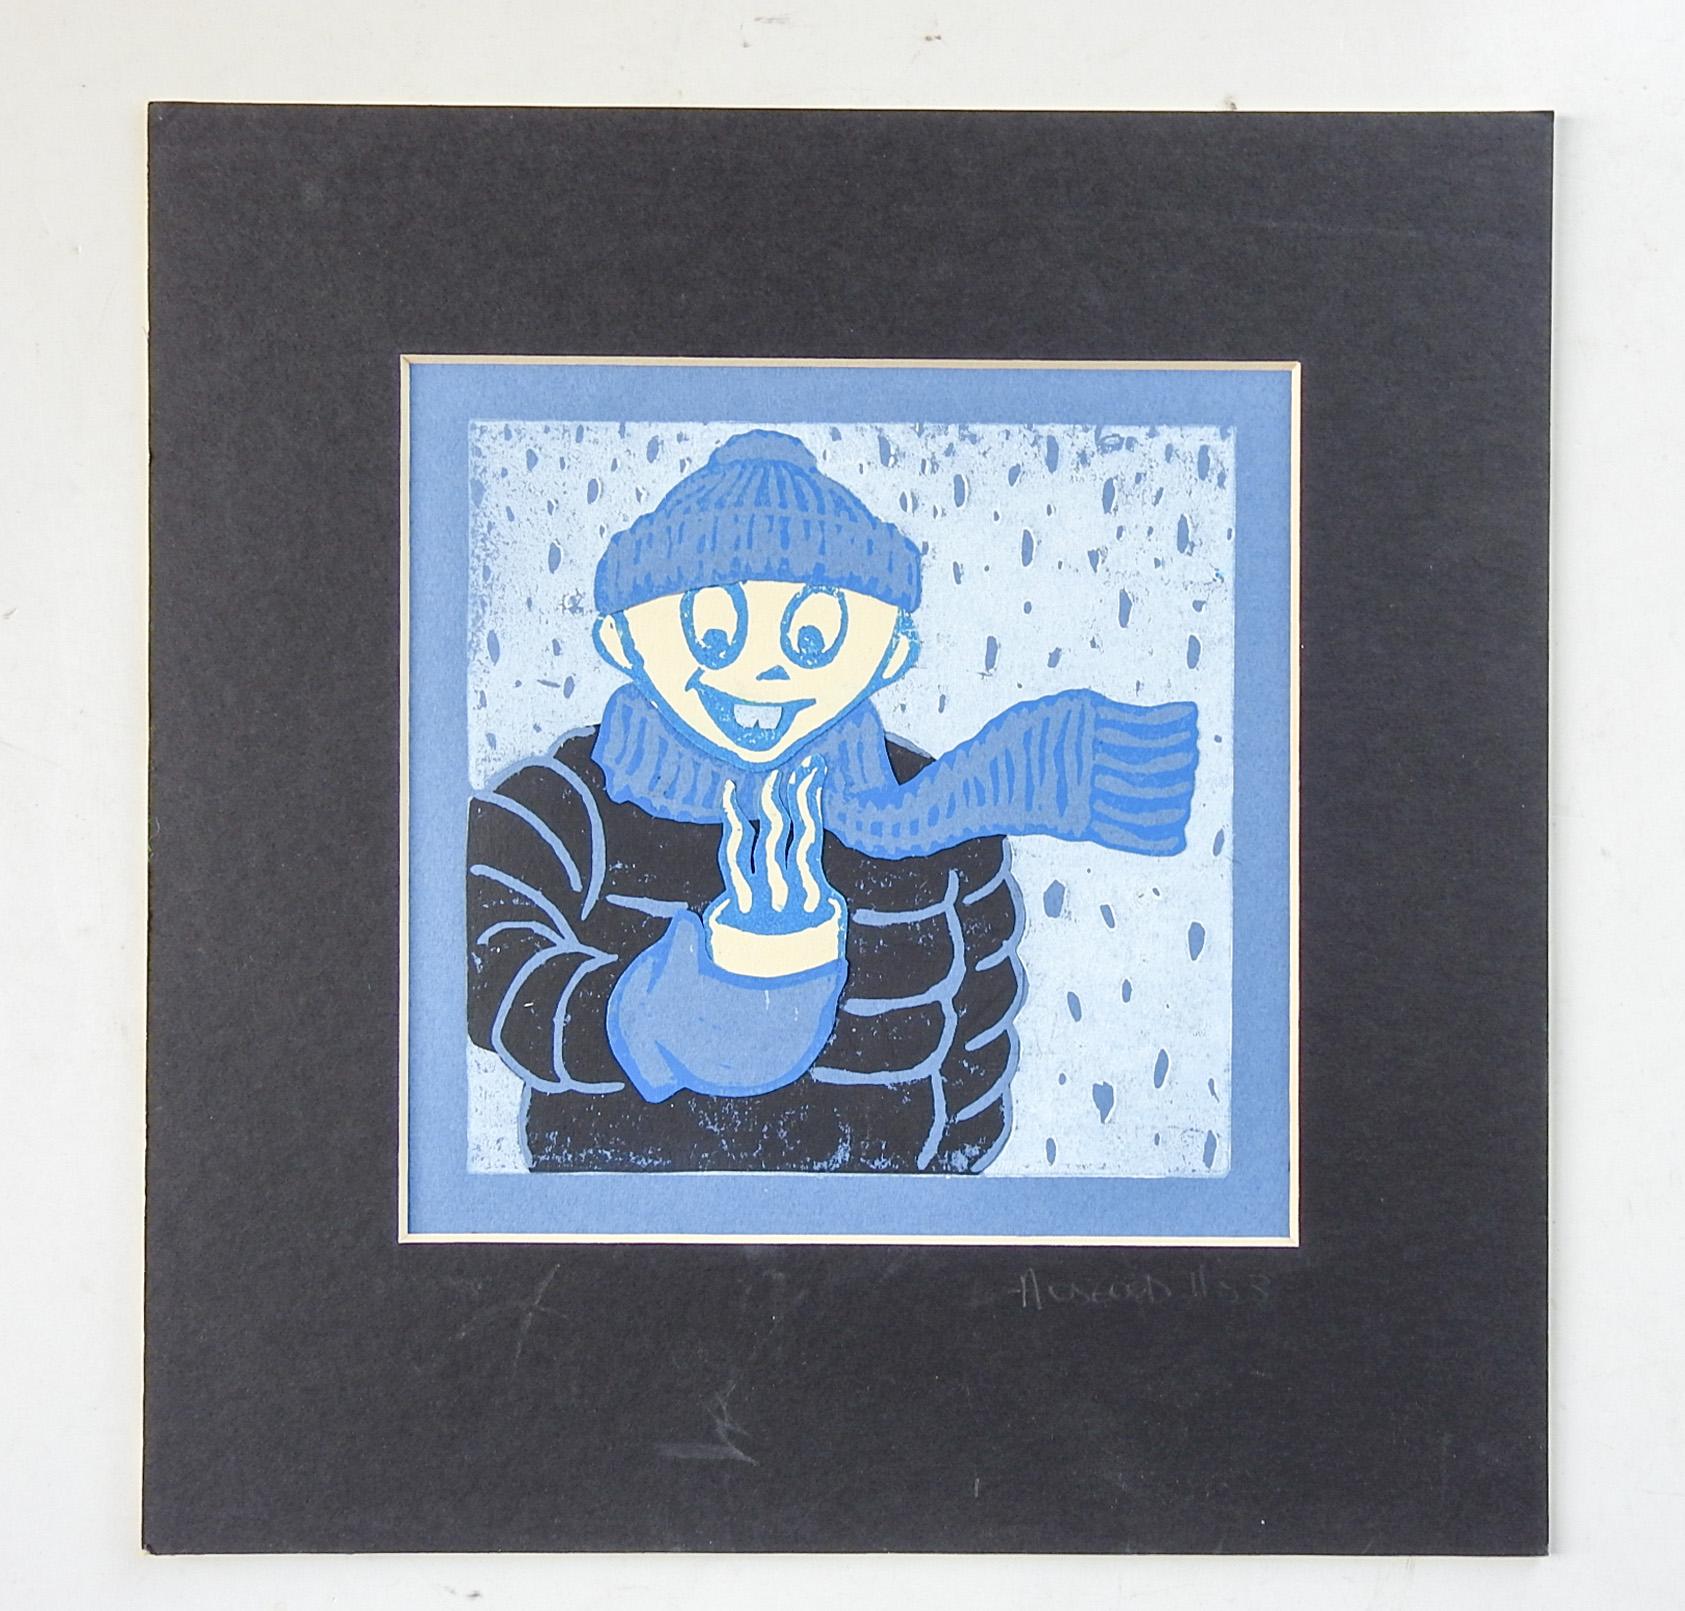 Serigraph on paper of character bundled up for winter holding a steaming cup of coffee or hot chocolate. In blue and black, signed A Osgood numbered 1/53 at bottom of mat. Unframed, displayed in mat and backing, opening size 7